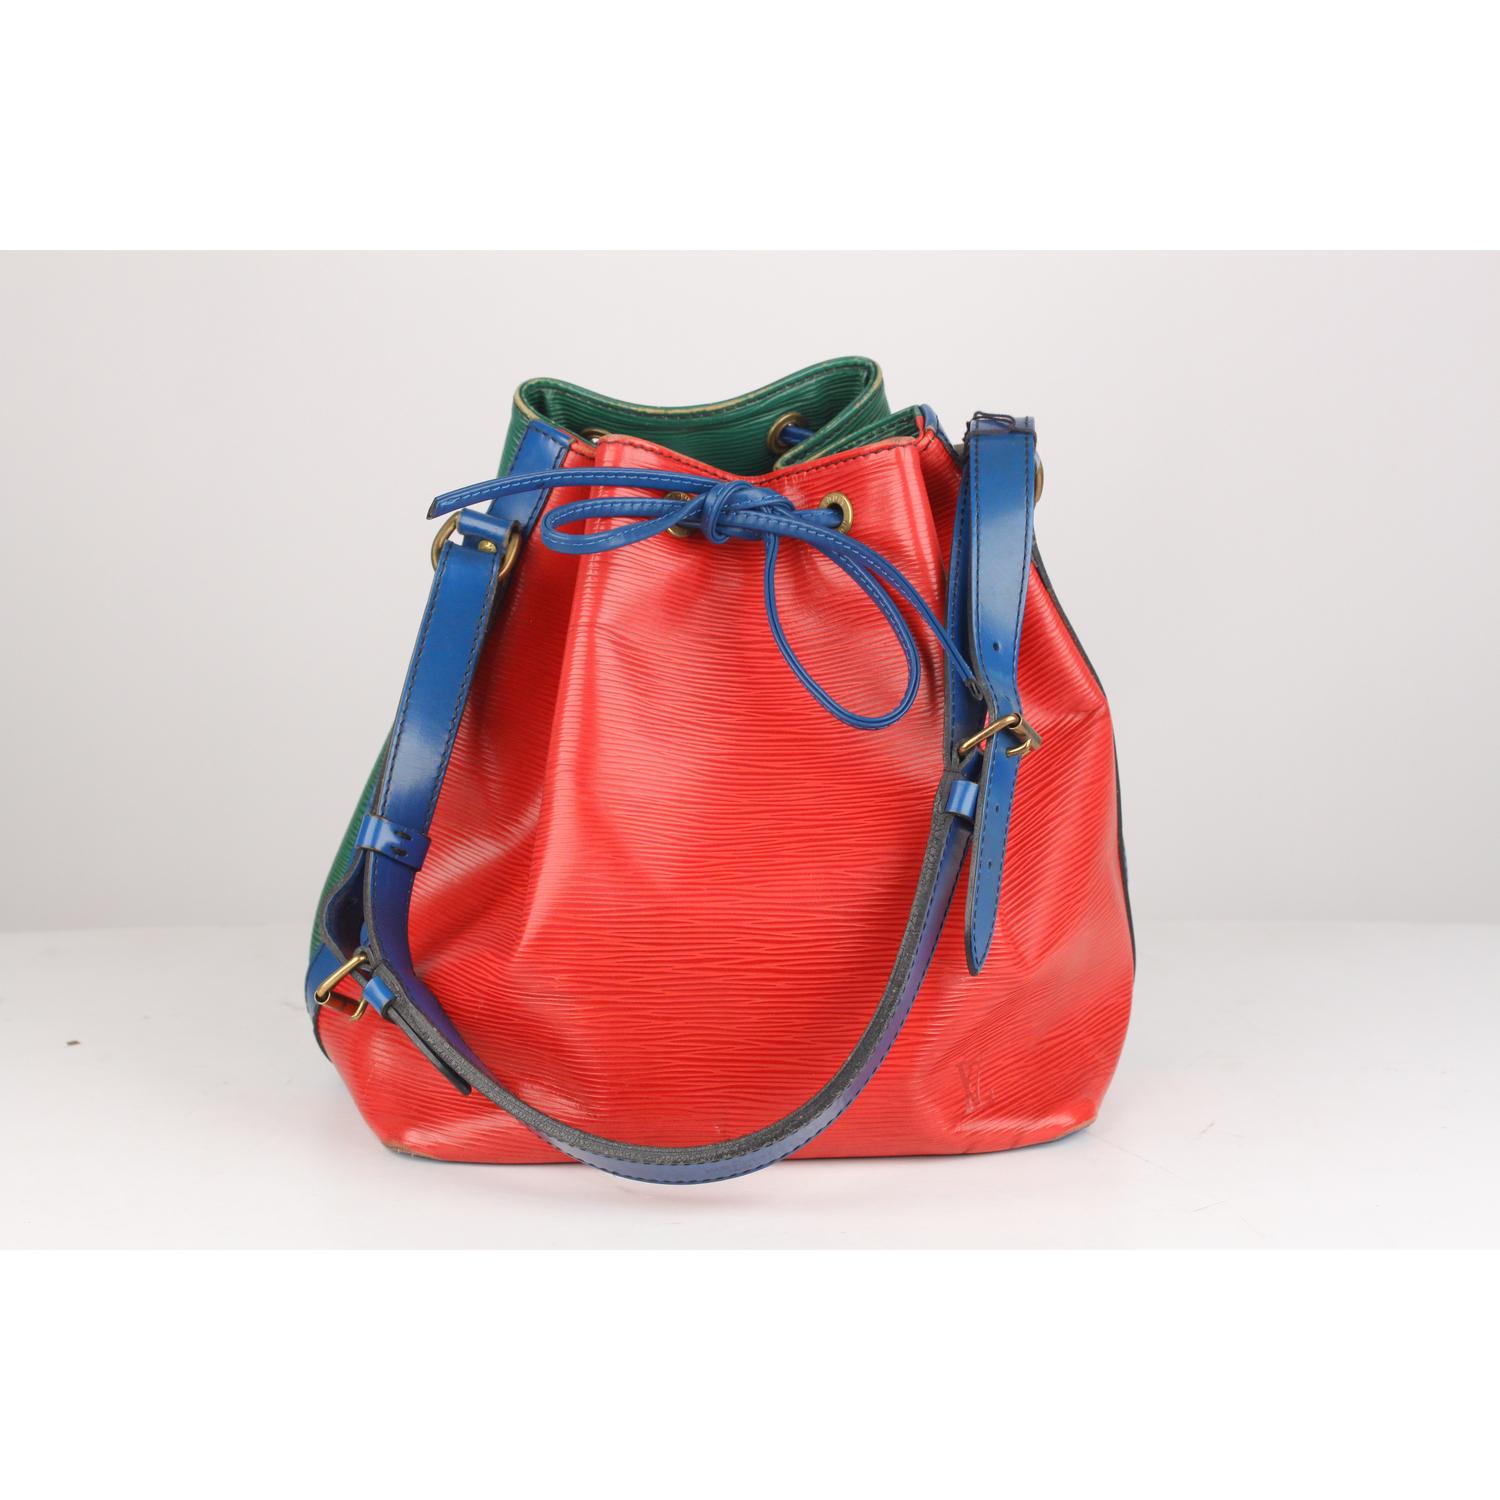 Iconic PETIT NOE' by LOUIS VUITTON was first created in 1932 to carry champagne bottles. Multicolored Epi Leather, with drawstring closure and Leather and microfibrer lining. 1 side zip pocket inside, Adjustable shoulder strap

Logos / Tags: LV -